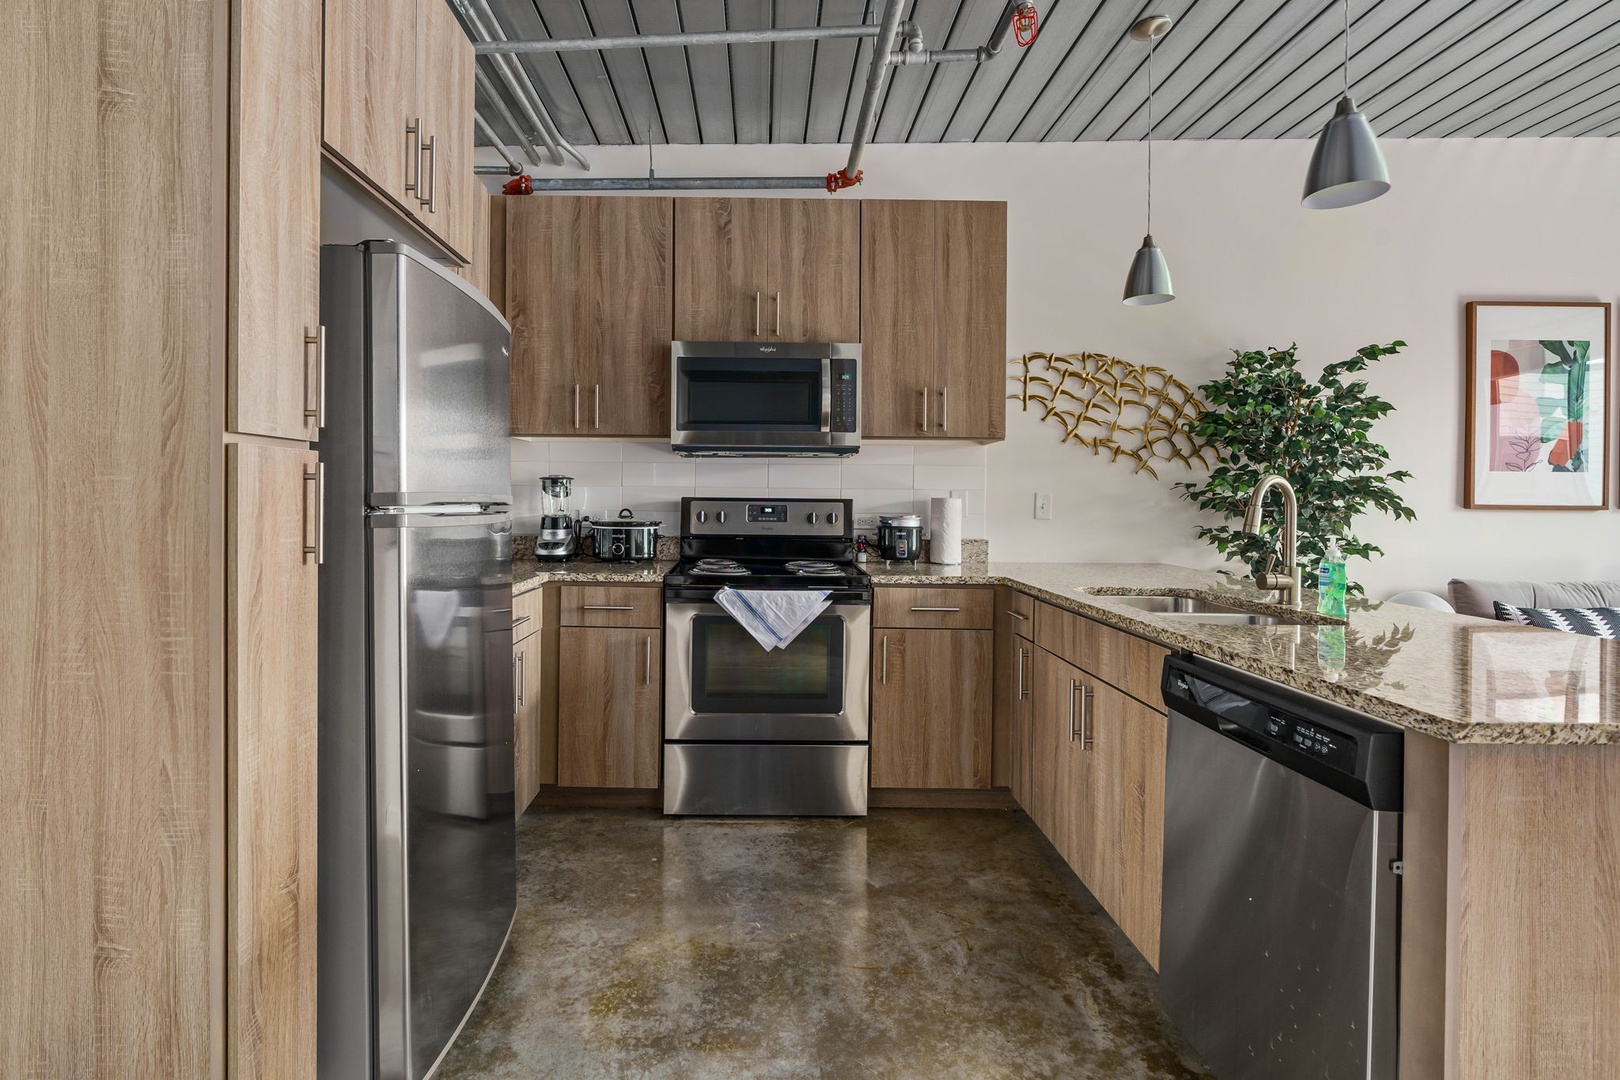 Create delicious meals in this well-equipped kitchen with modern amenities.